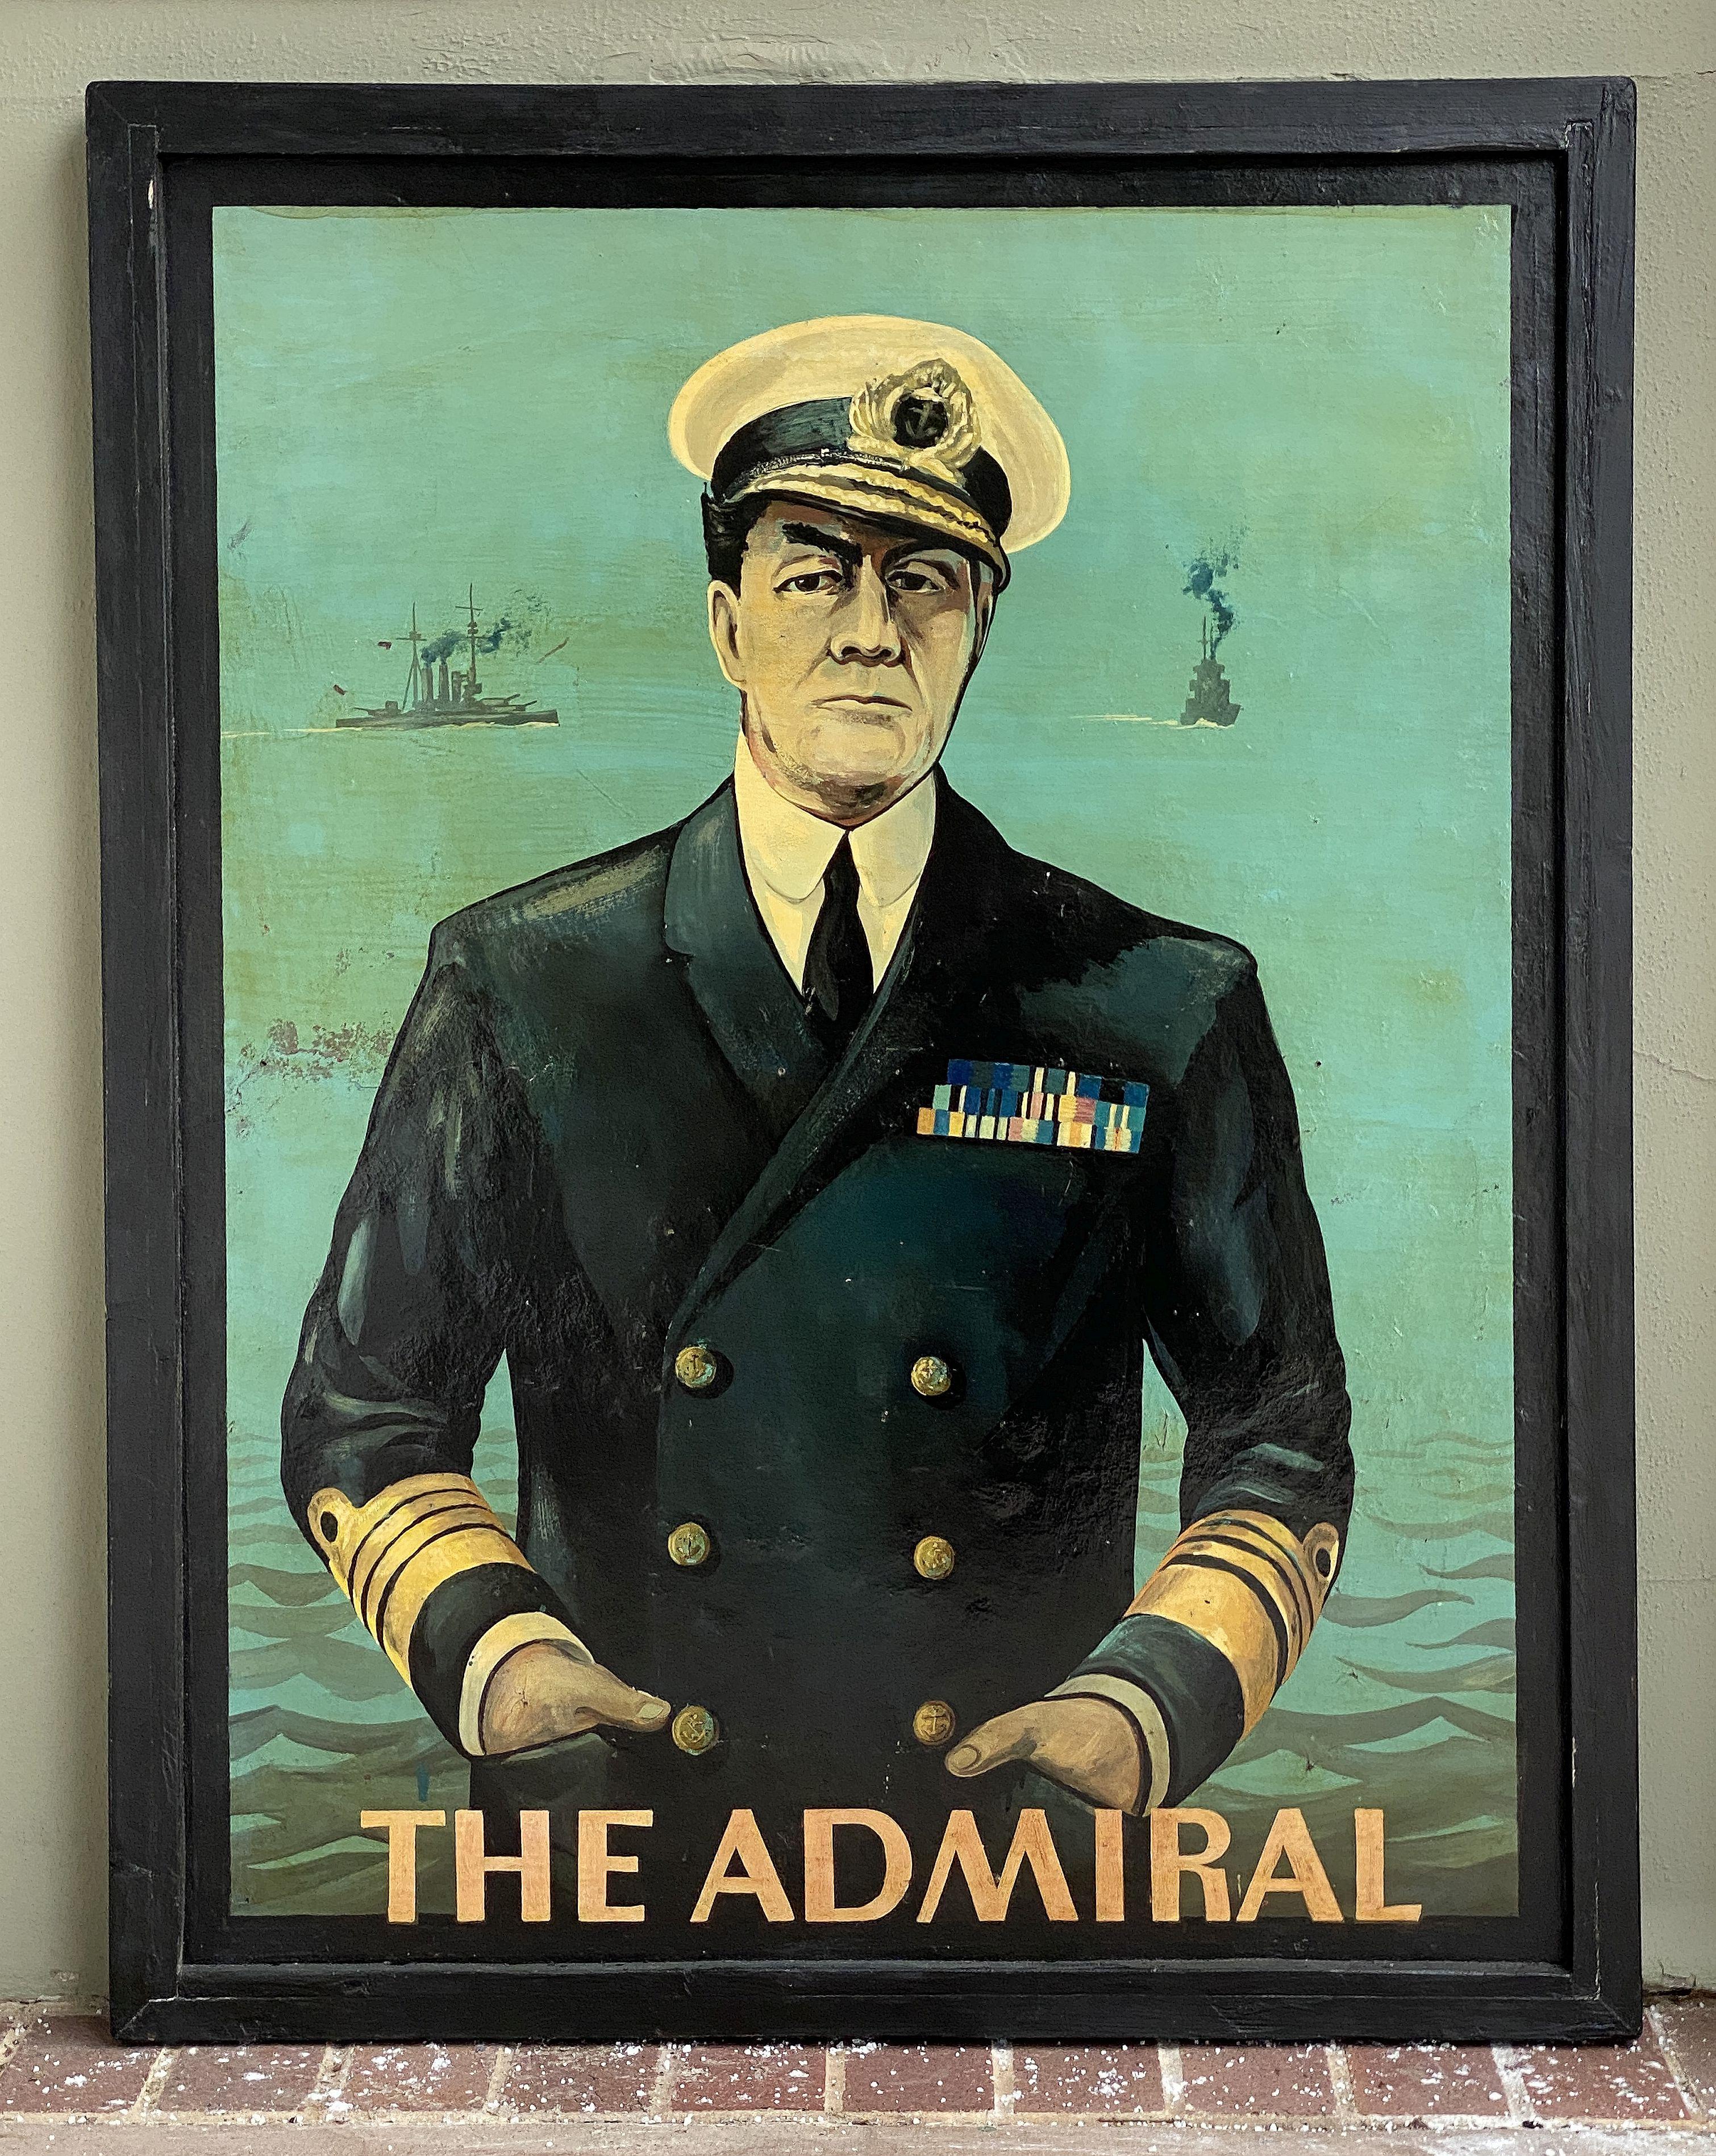 An authentic English pub sign (one-sided) featuring a portrait painting of a decorated Royal Navy admiral with the sea and warships in the background, entitled: The Admiral.

A very fine example of vintage advertising artwork, ready for display.

